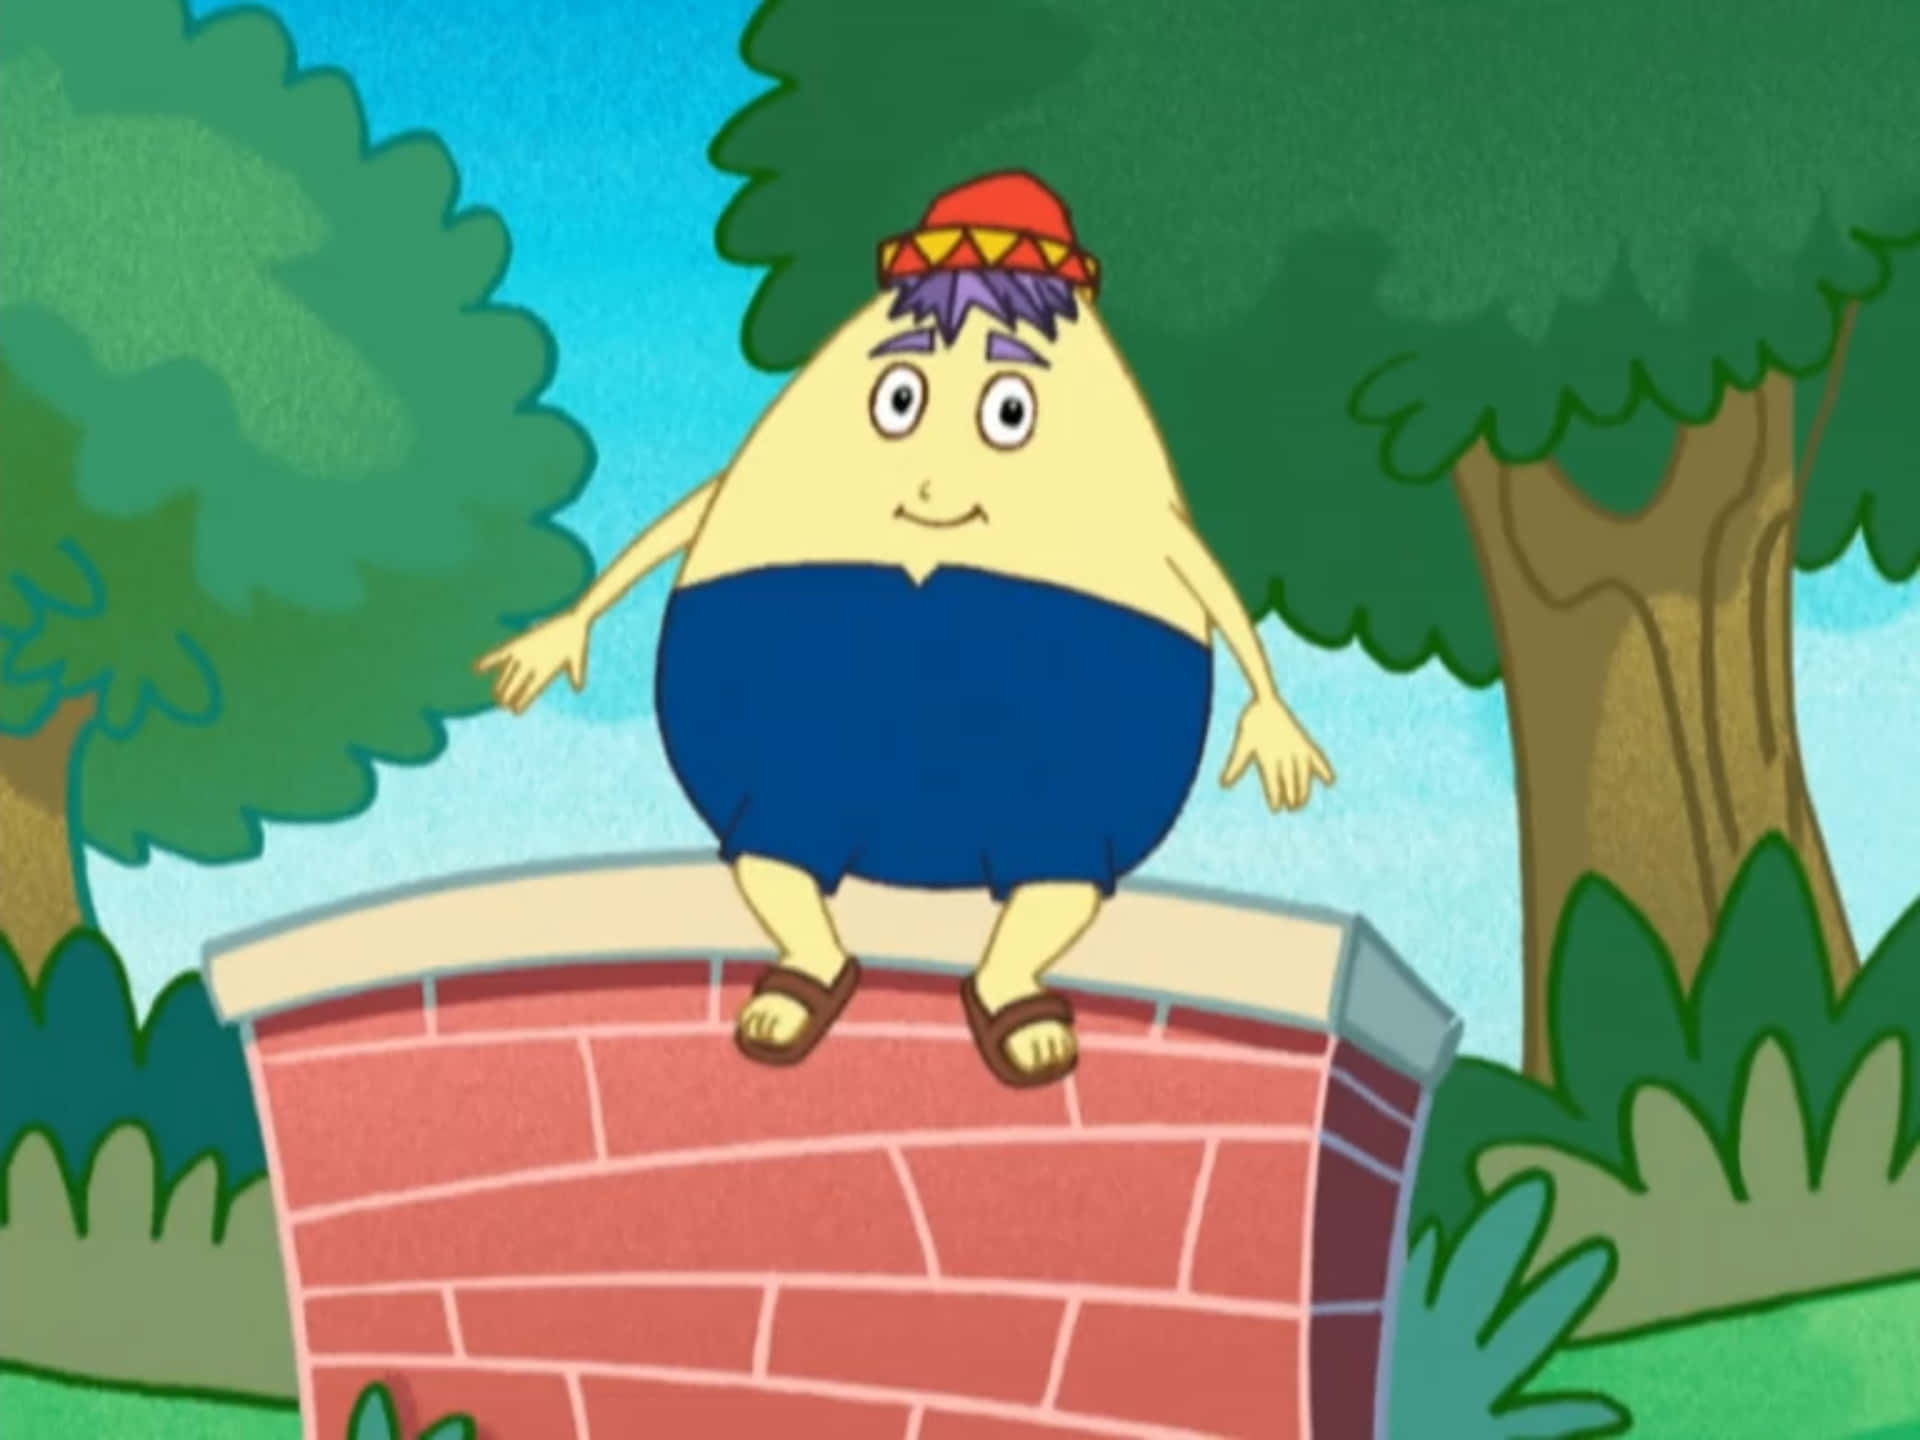 Captivating image of the classic Humpty Dumpty character